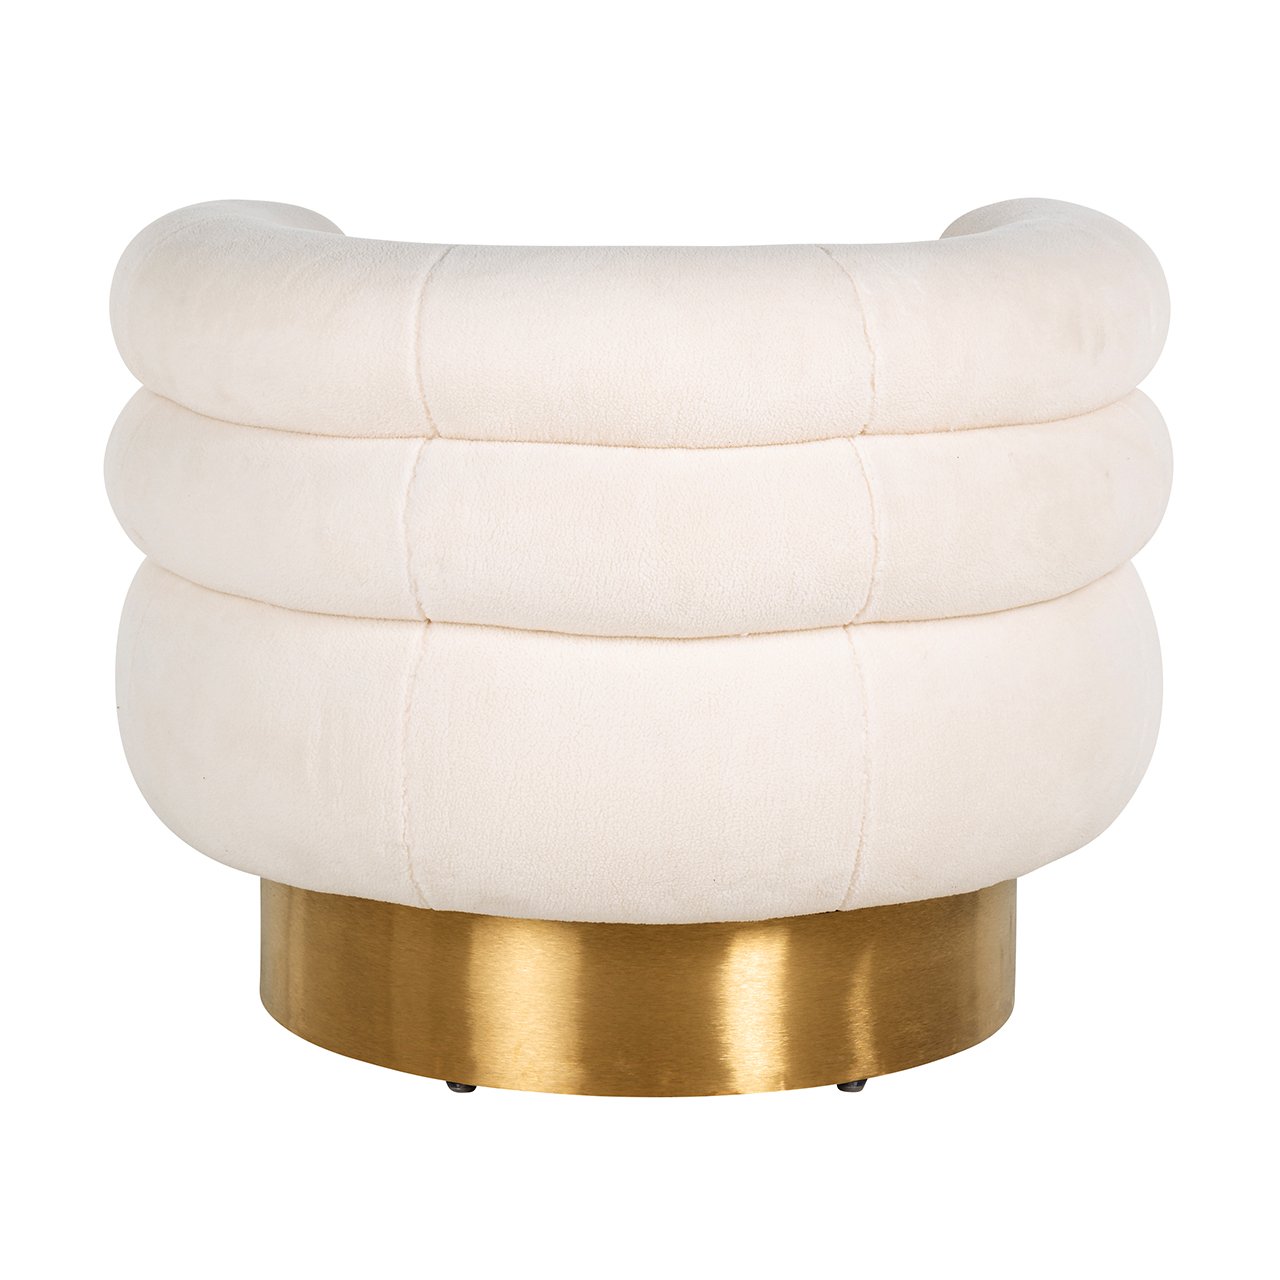 Drehsessel Teddy Fayah White teddy / Brushed gold